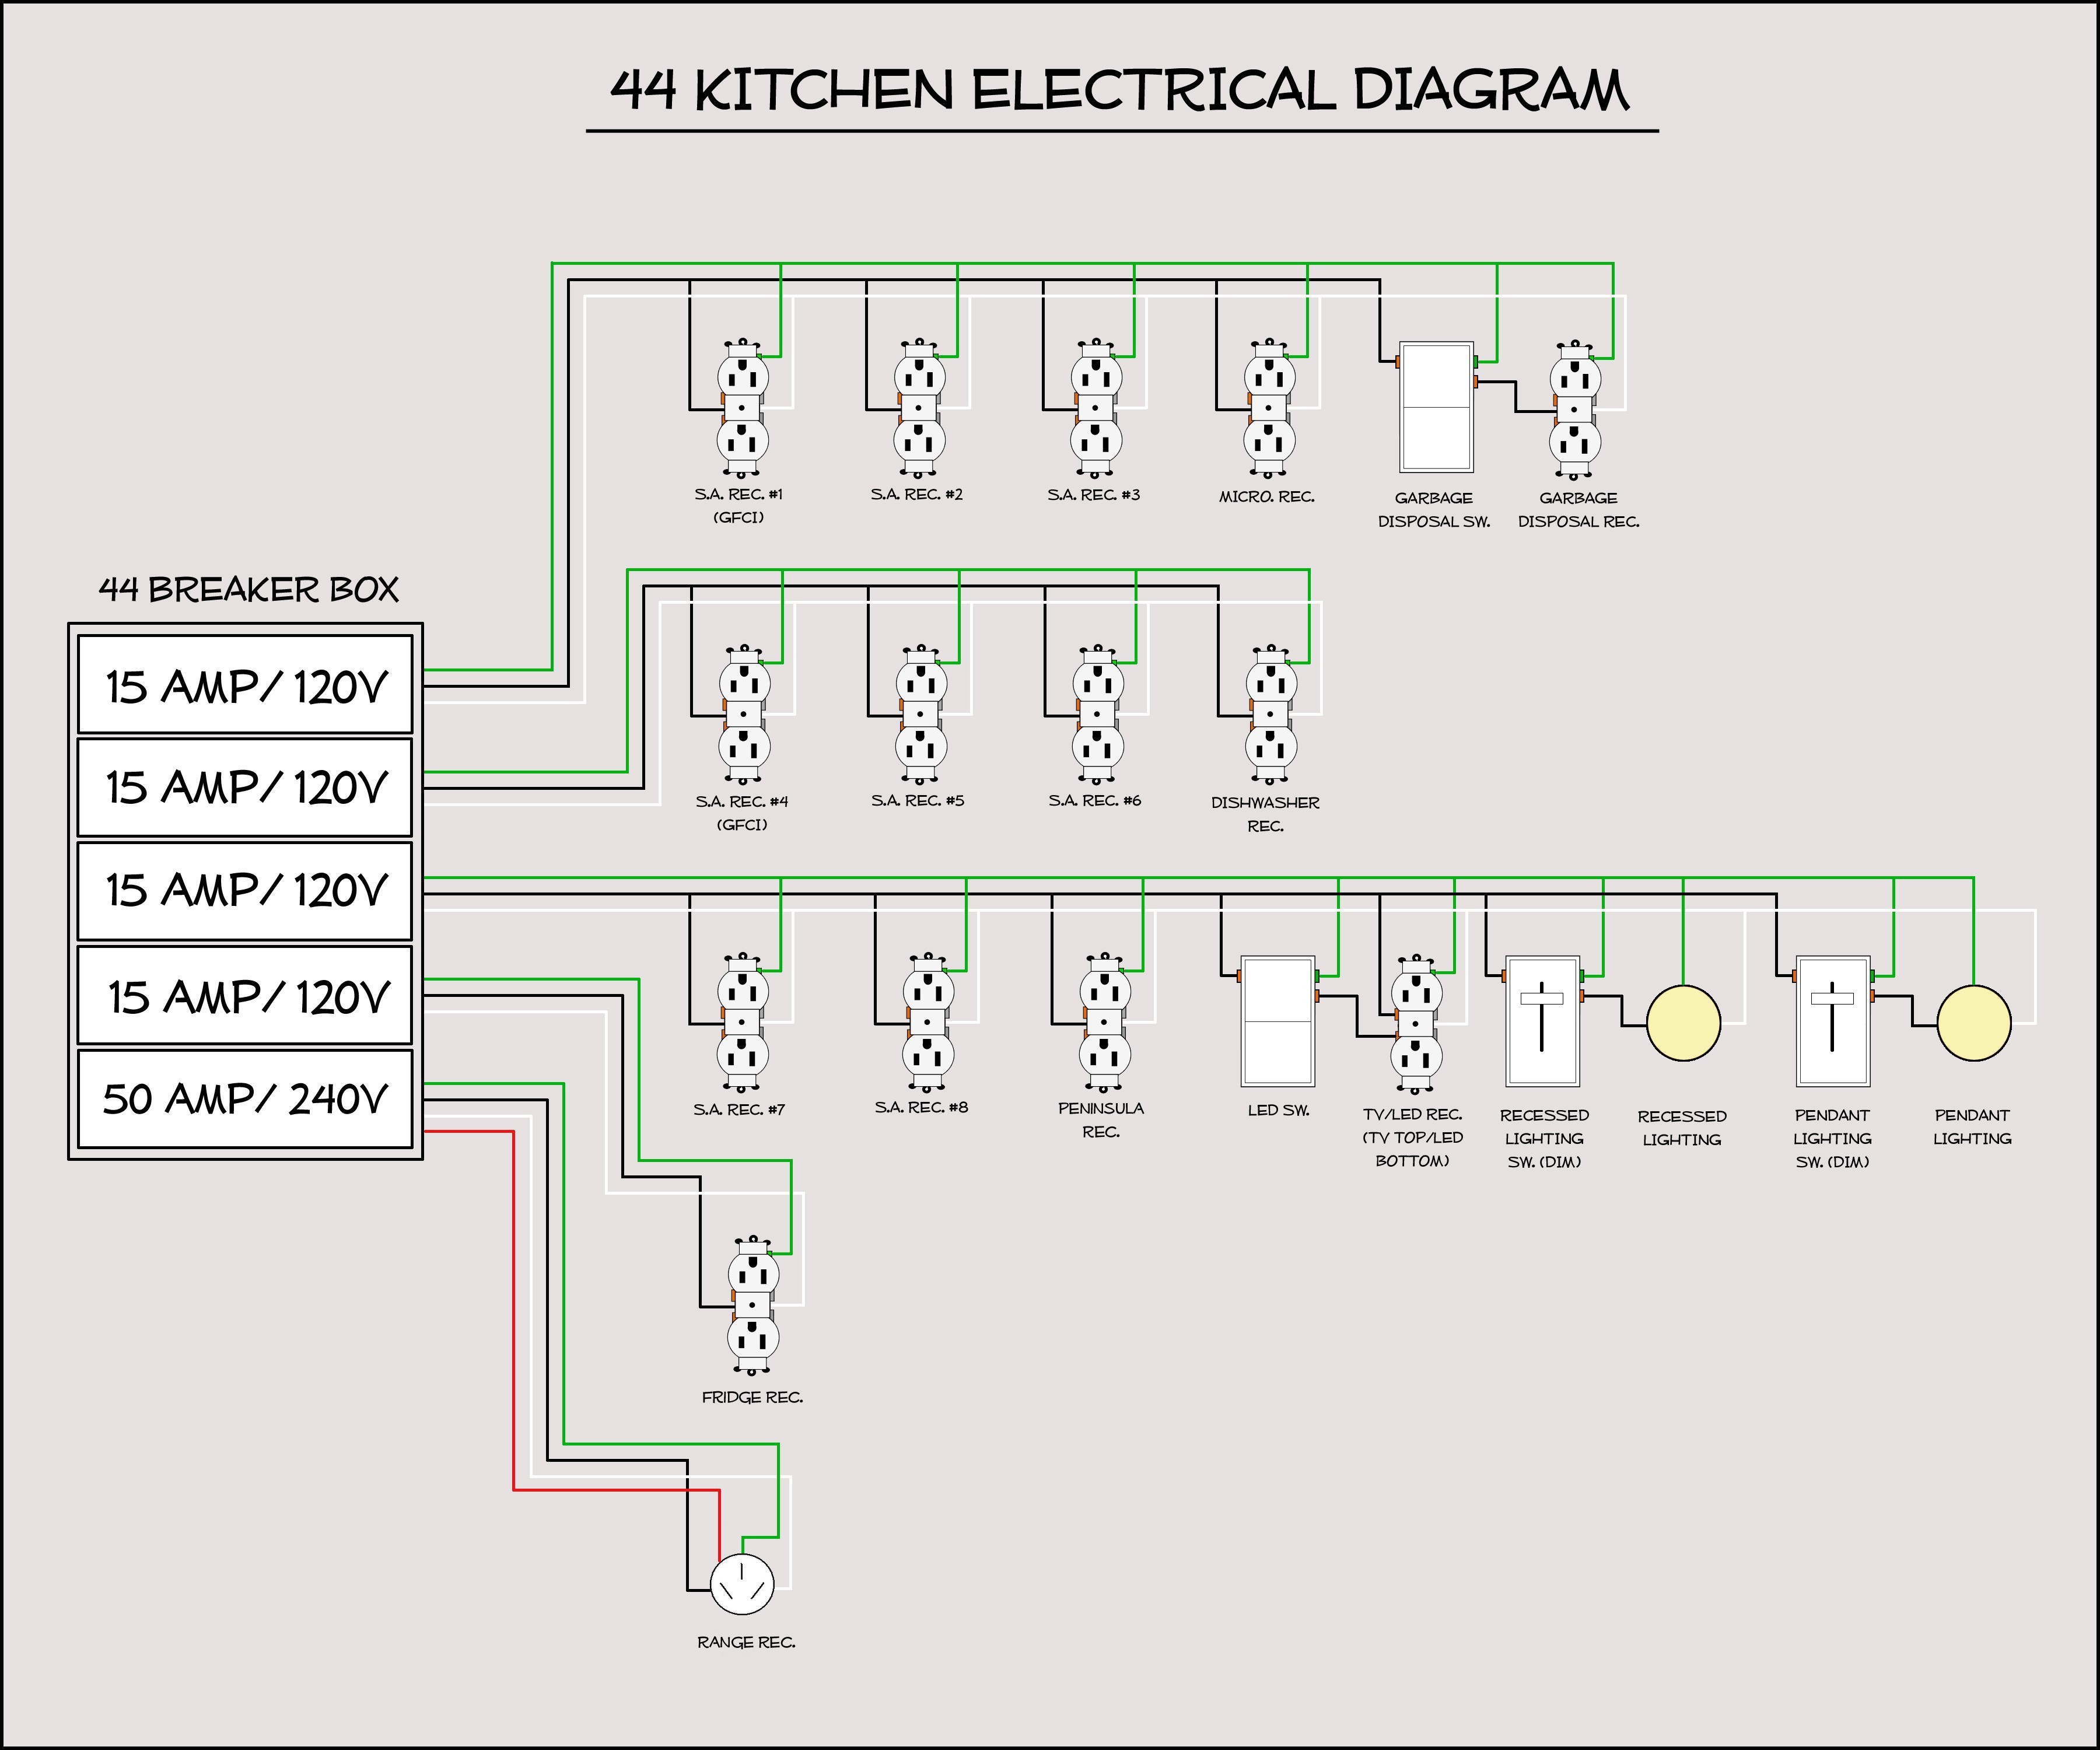 Electrical Outlet Wiring Diagram Awesome Lovely Kitchen Wiring Diagram Electrical and Wiring